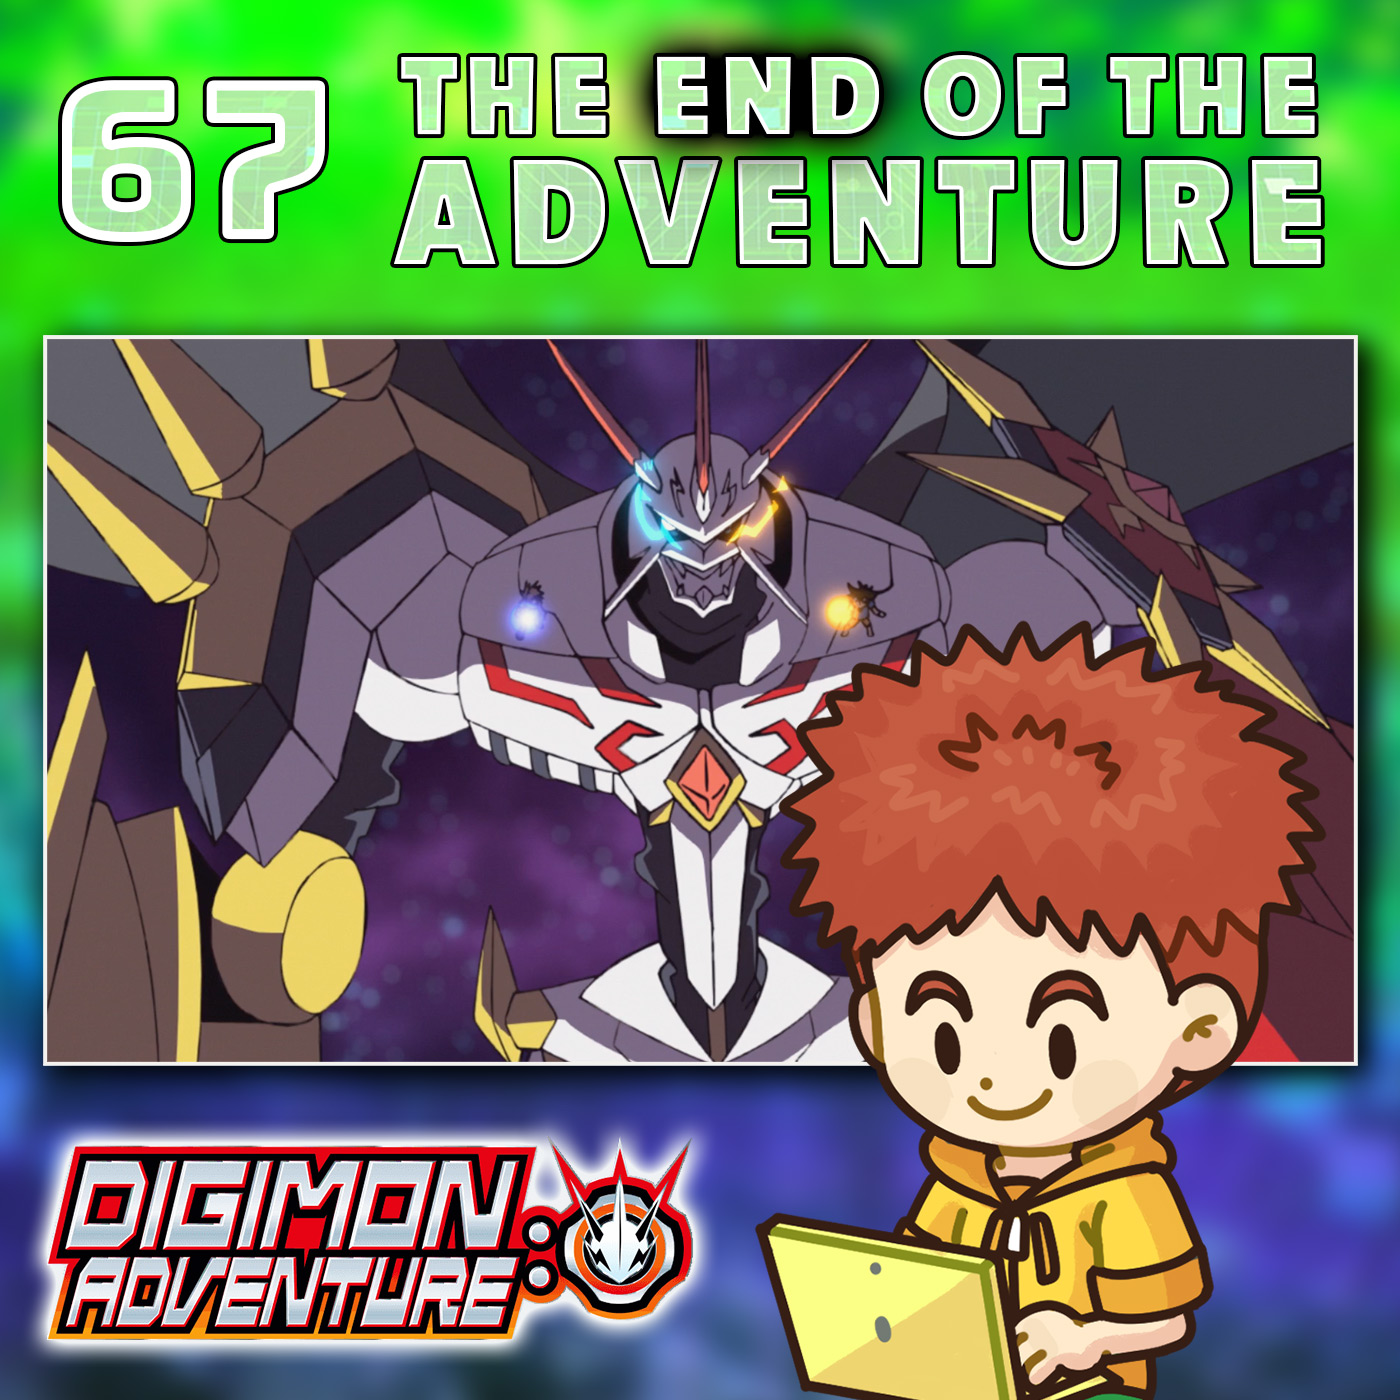 Digimon Ghost Game episode 67 preview hypes the finale with Gammamon's Fate